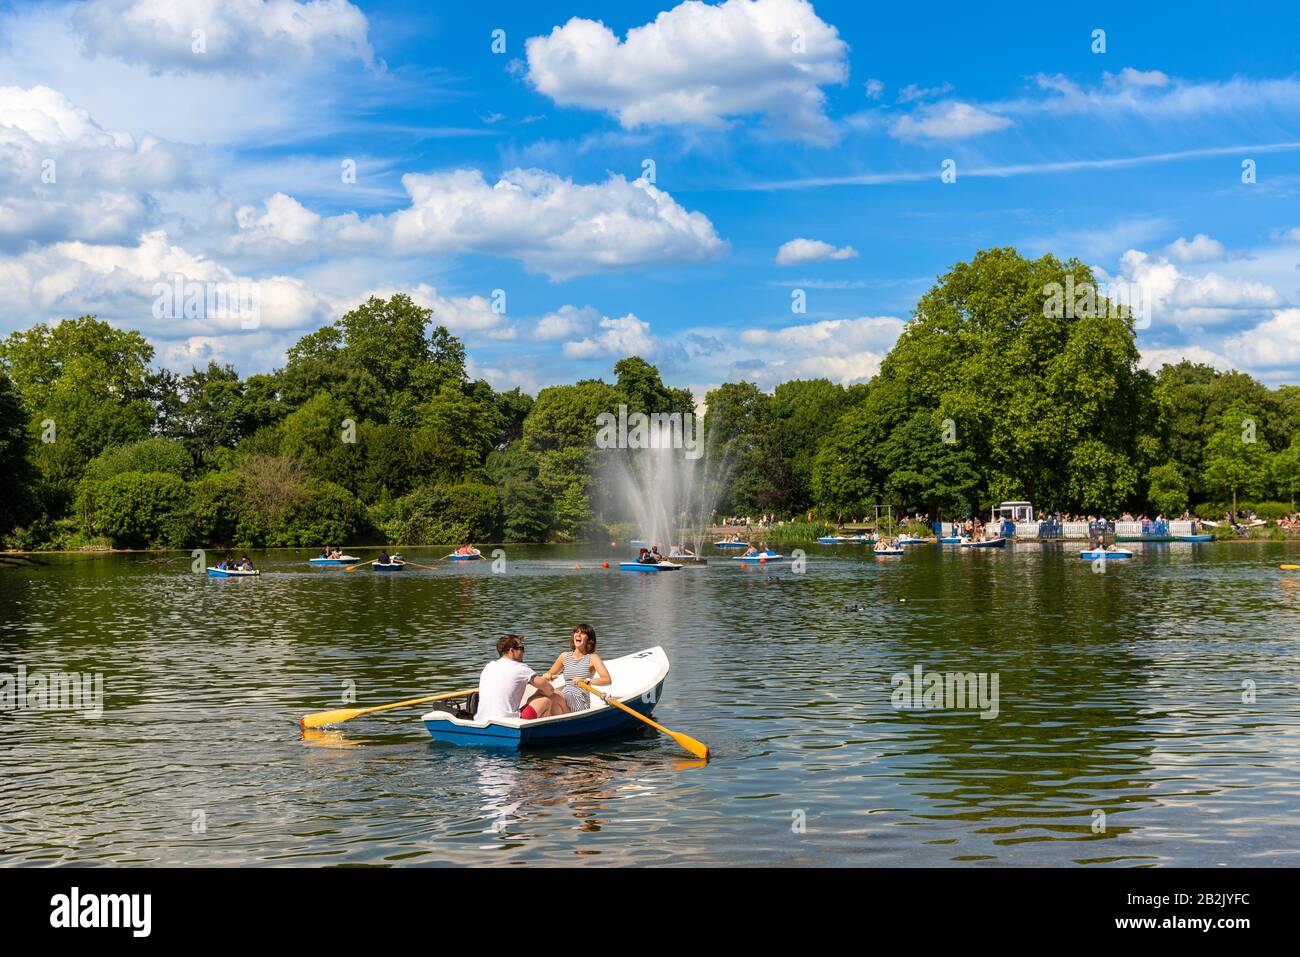 The West Boating Lake in Victoria Park, London, UK Stock Photo